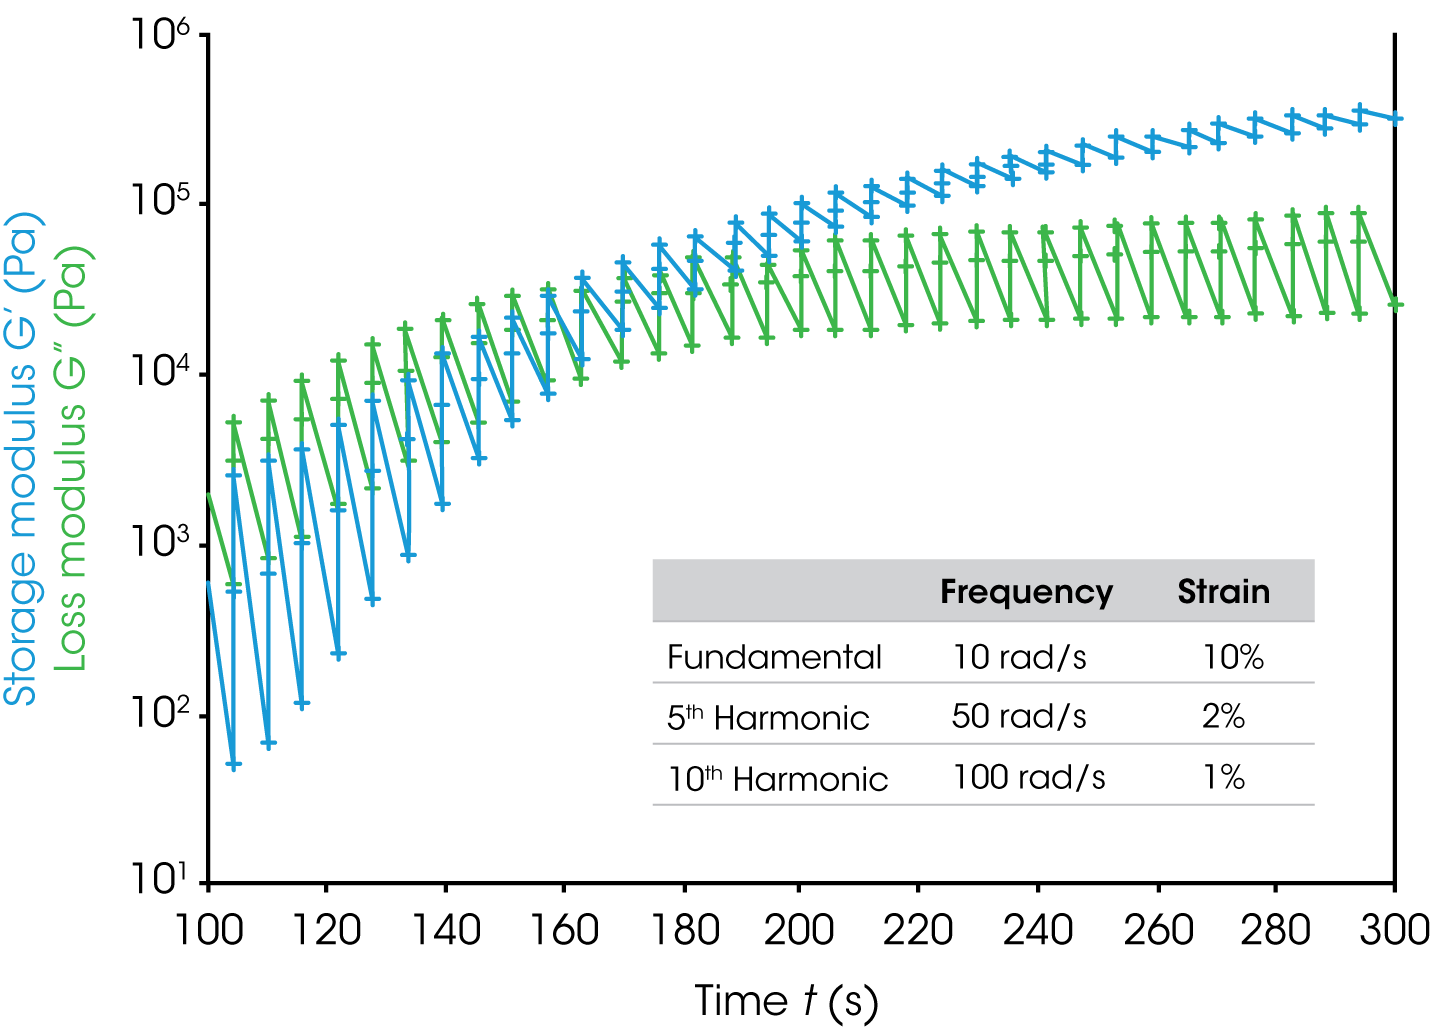 Figure 8a. The multi-wave raw data